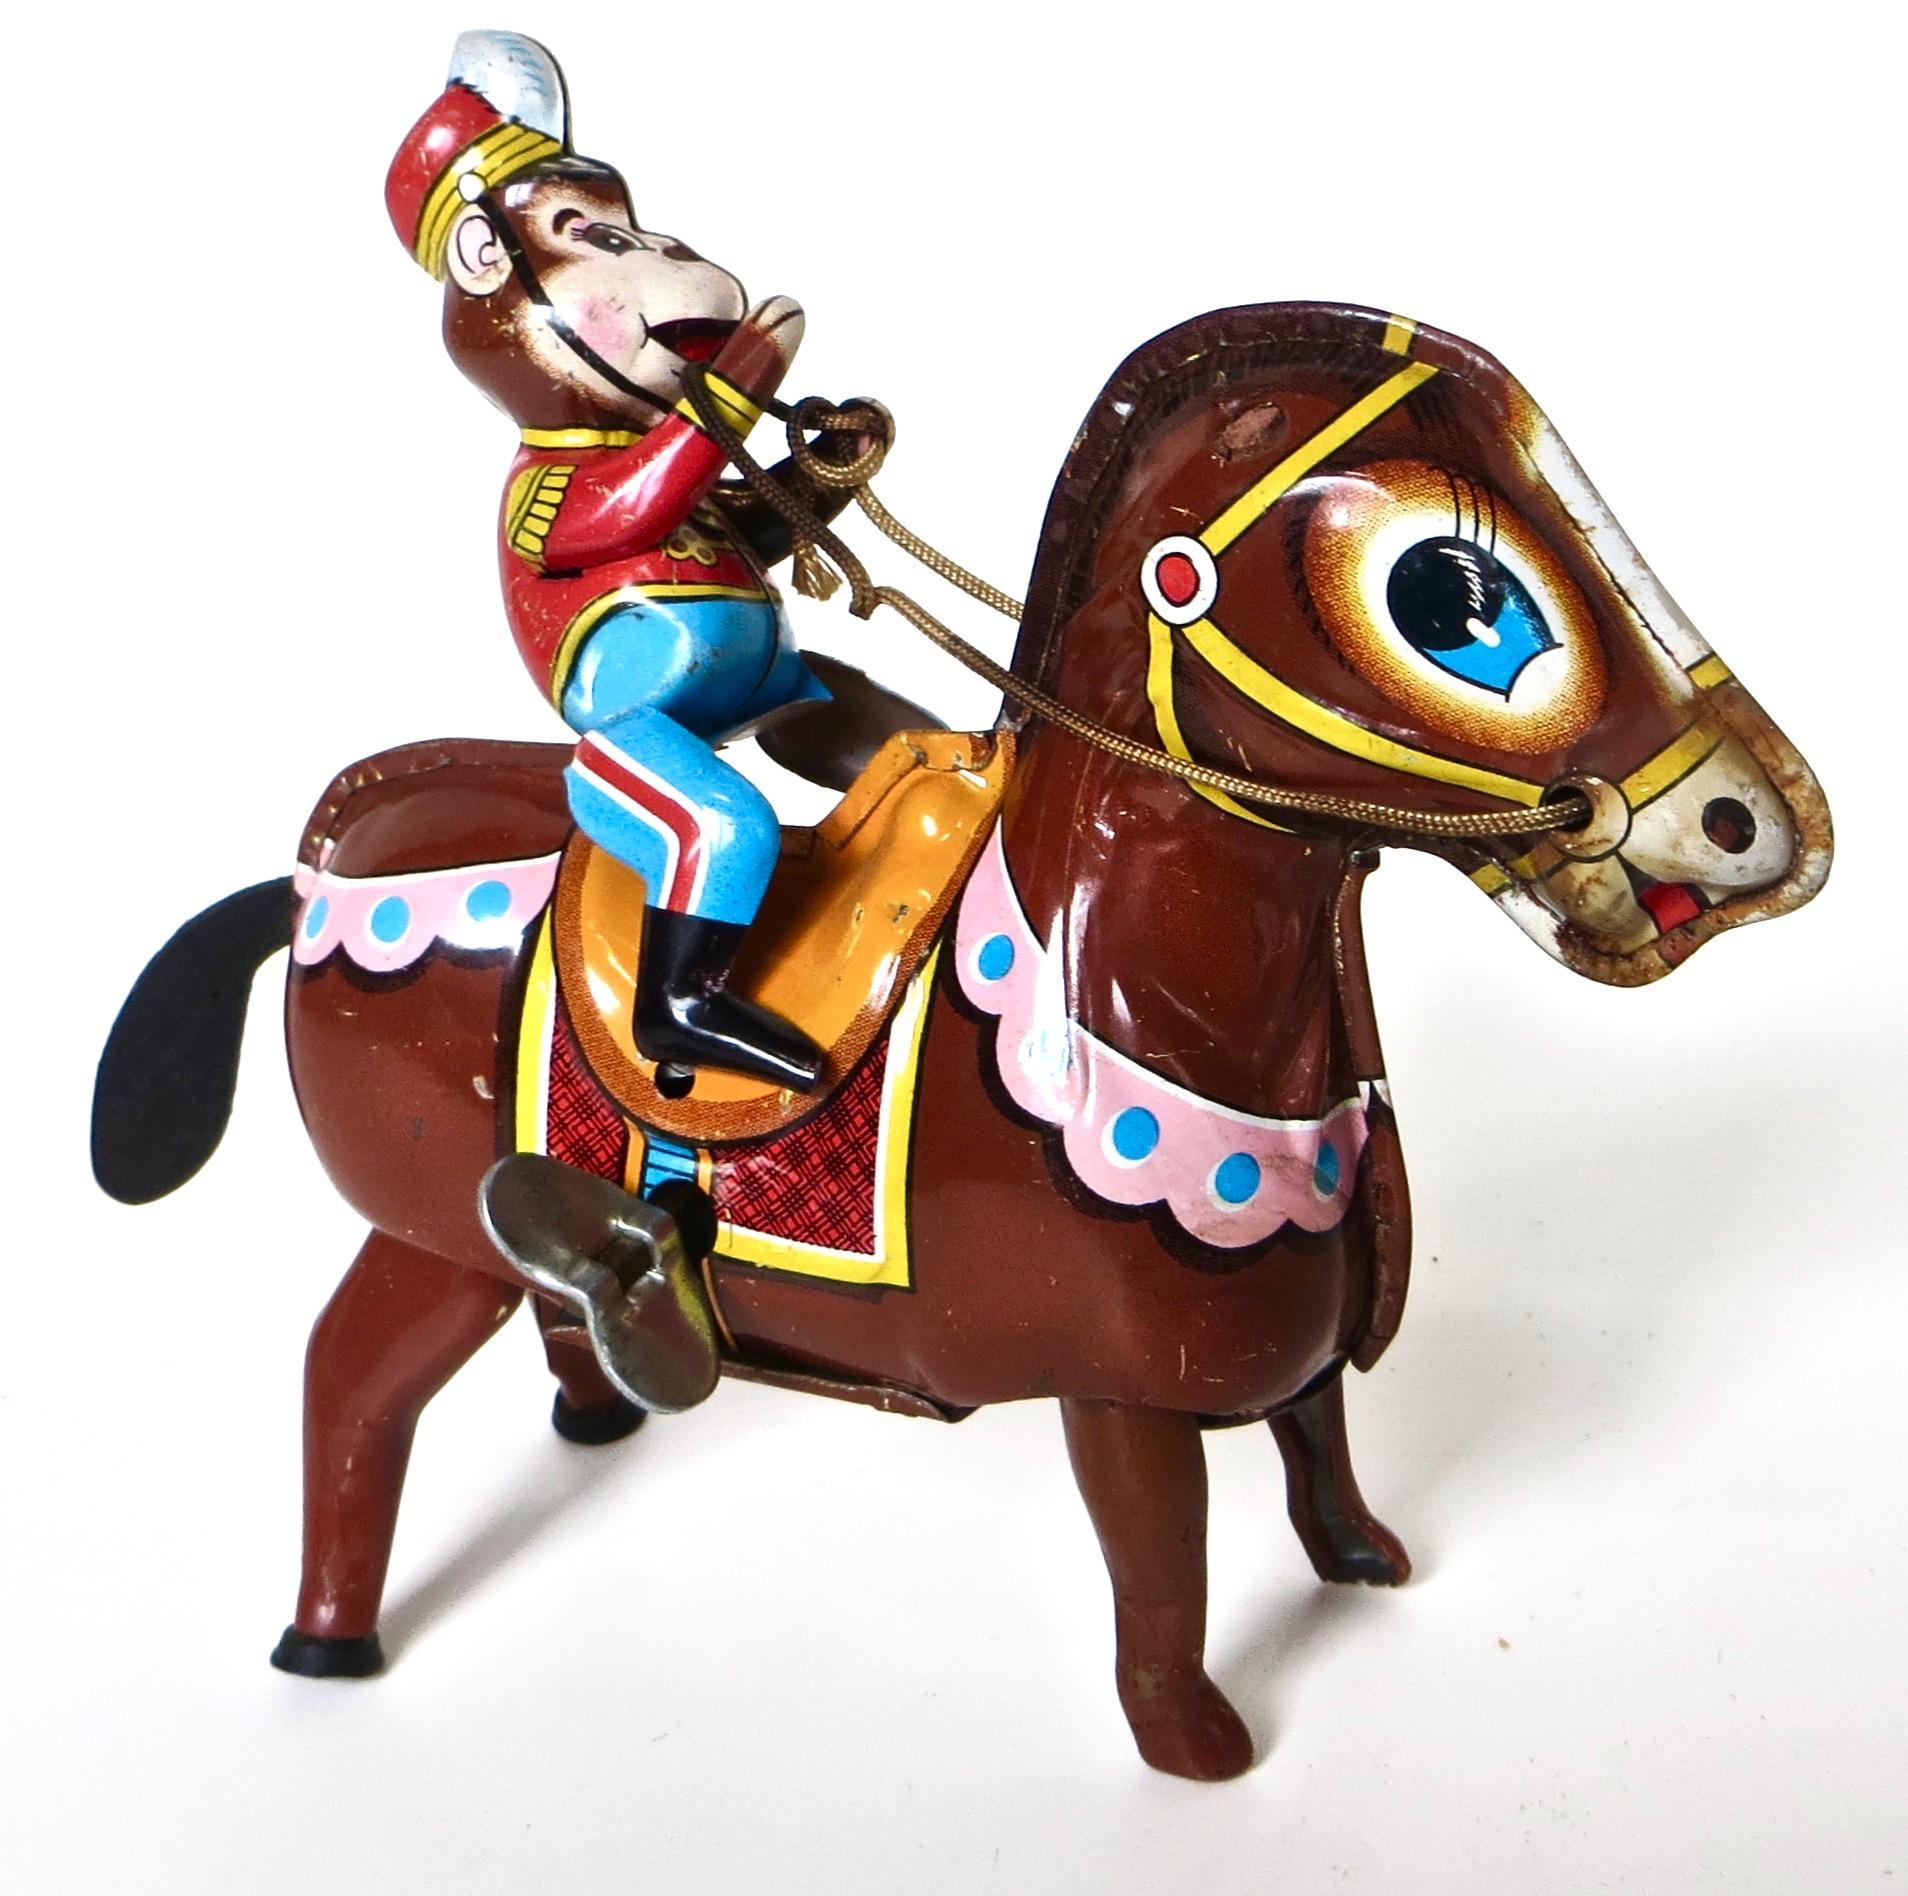 Made in Tokyo, Japan by The Haji Company (see image for mark/logo), this all tin vintage wind up toy, circa 1958, depicts a 